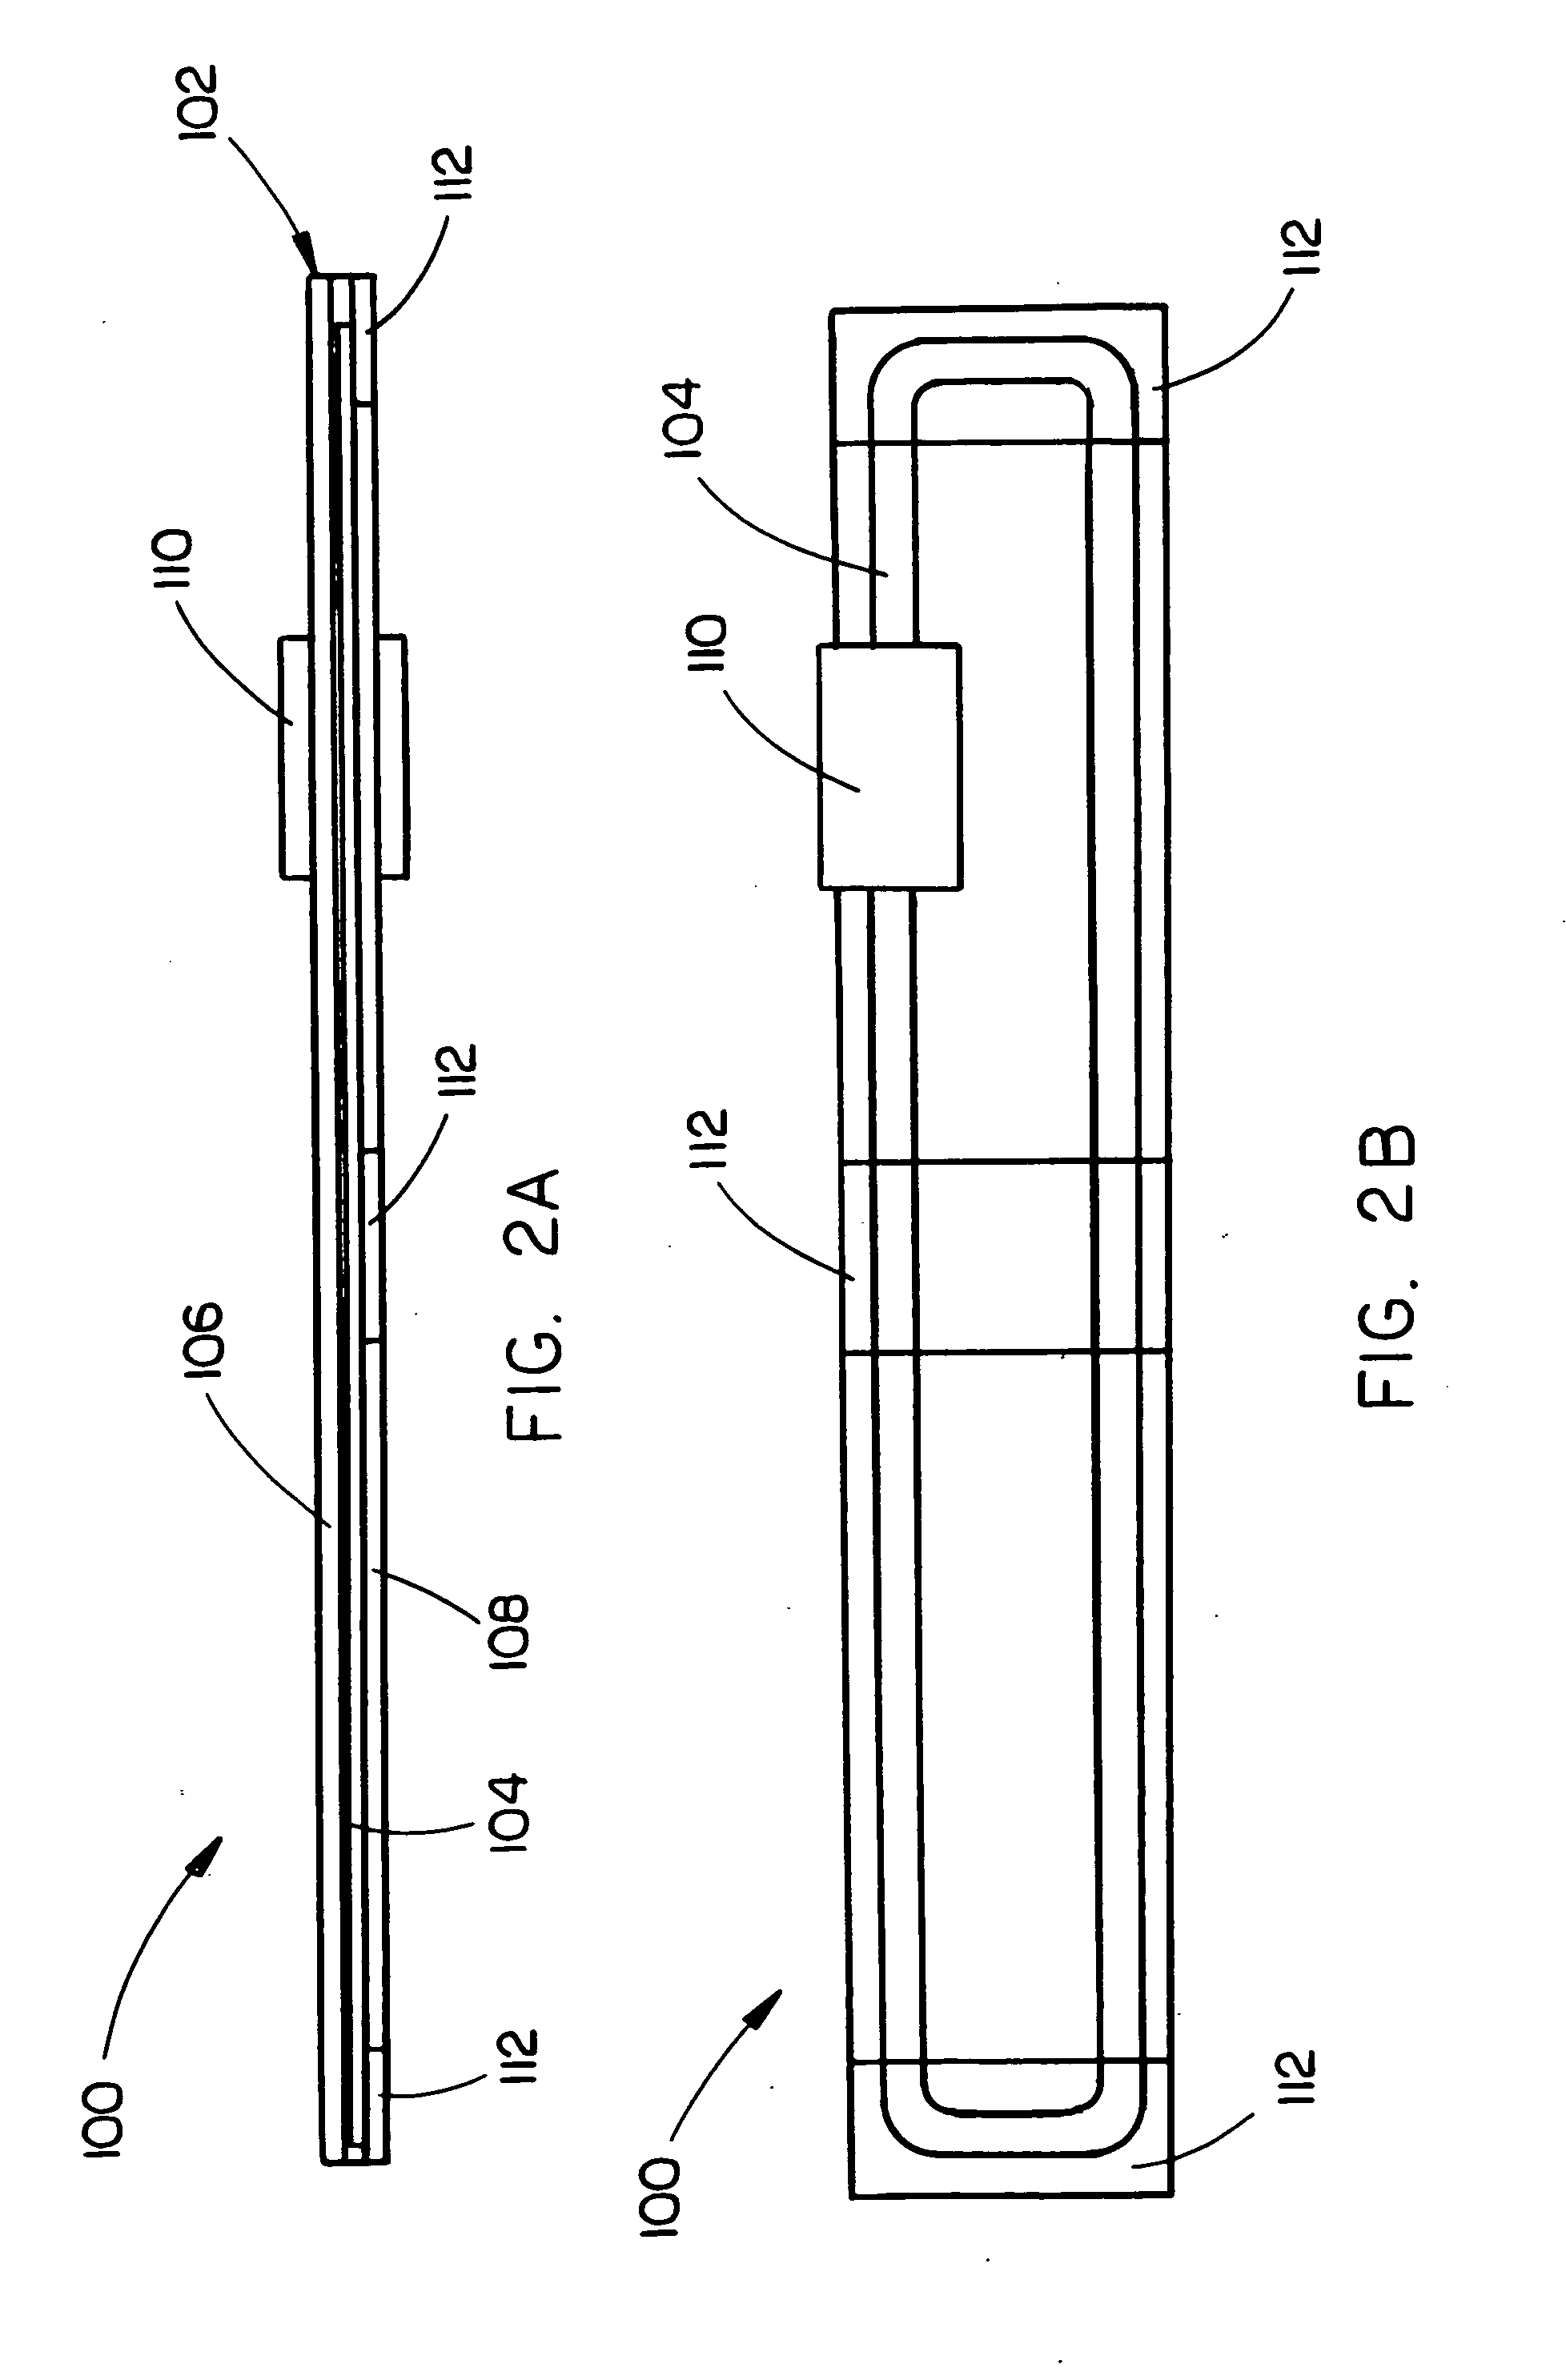 Mechanically compliant thermal spreader with an embedded cooling loop for containing and circulating electrically-conductive liquid